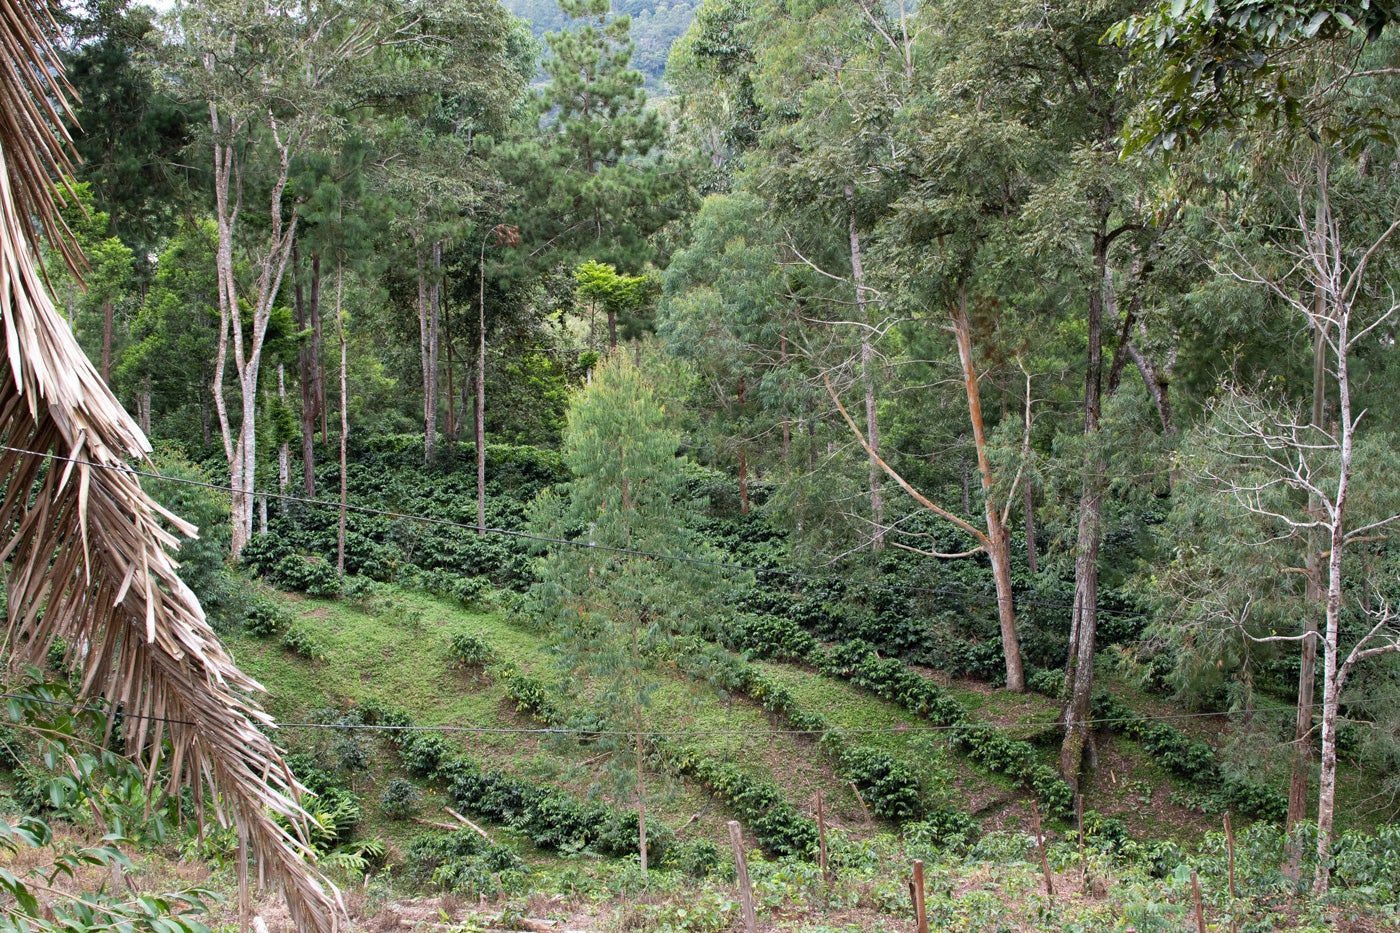 A Bird Friendly coffee farm with plants and trees of different heights